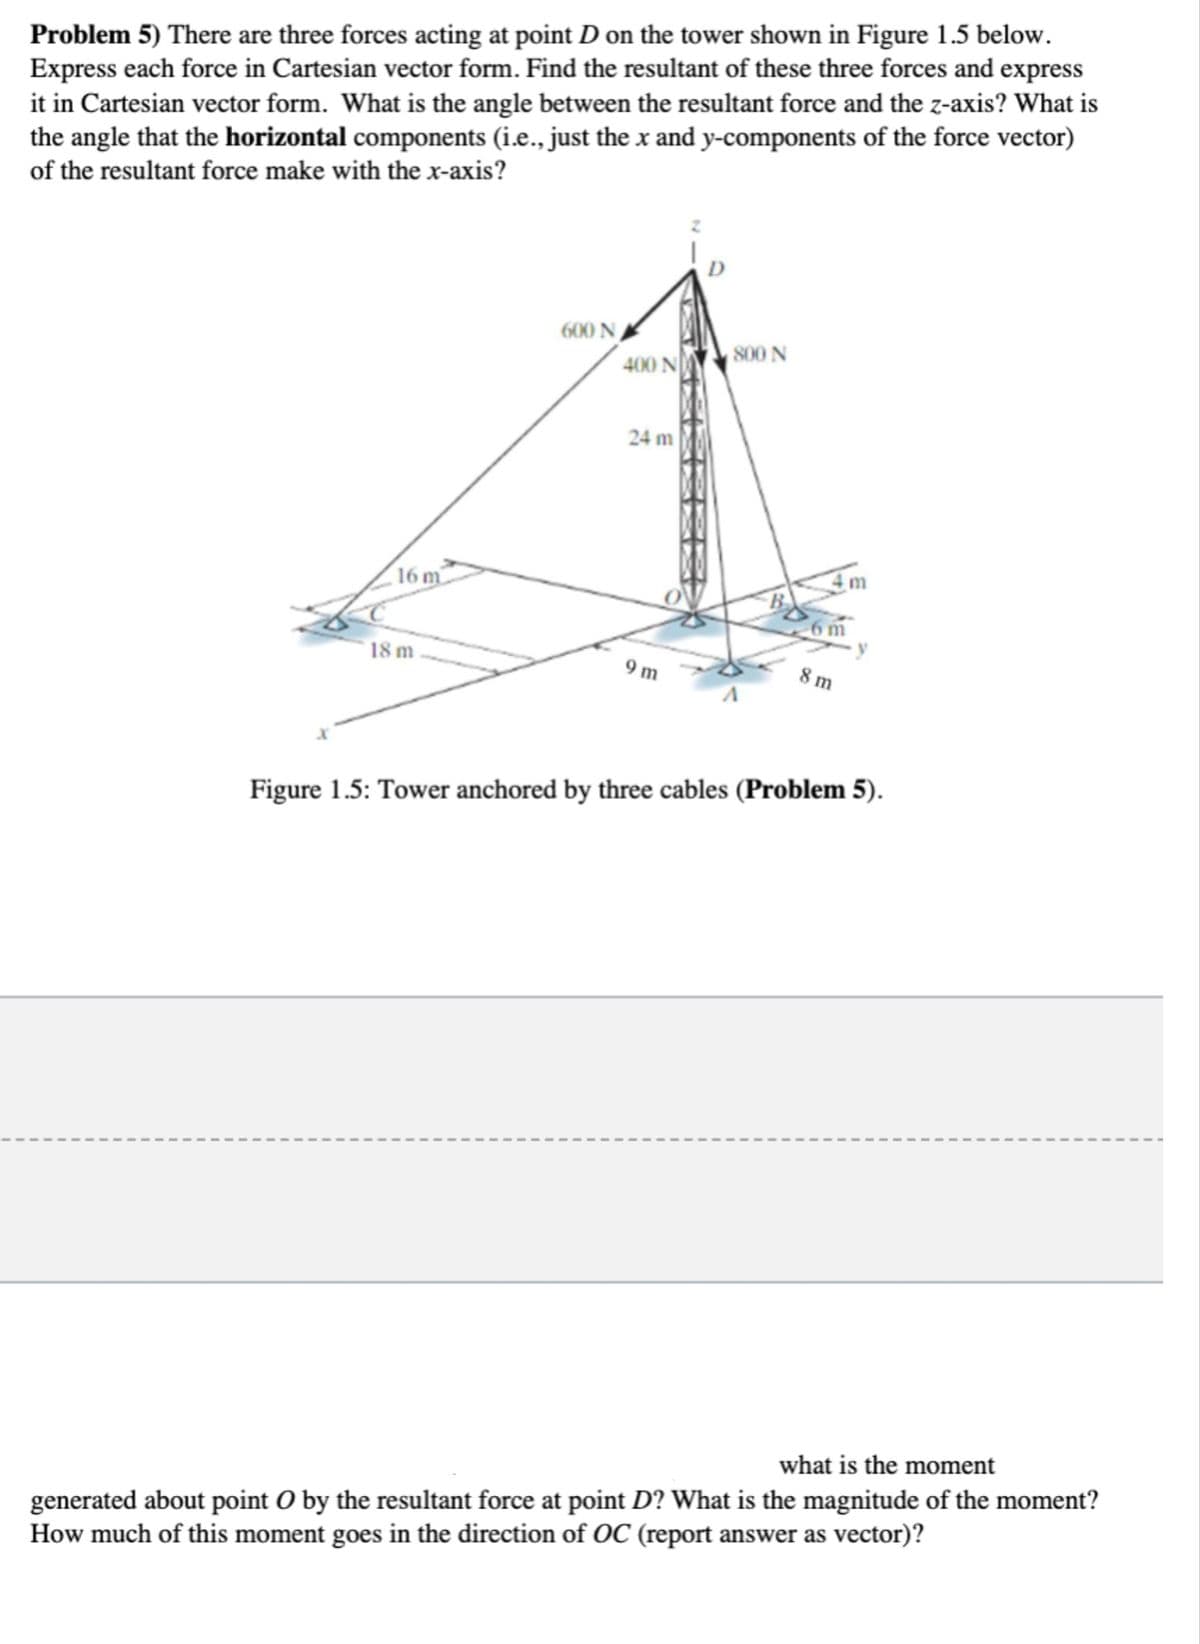 Problem 5) There are three forces acting at point D on the tower shown in Figure 1.5 below.
Express each force in Cartesian vector form. Find the resultant of these three forces and express
it in Cartesian vector form. What is the angle between the resultant force and the z-axis? What is
the angle that the horizontal components (i.e., just the x and y-components of the force vector)
of the resultant force make with the x-axis?
600 N ,
800 N
400 N
24 m
(16 m
18 m
9 m
8 m
Figure 1.5: Tower anchored by three cables (Problem 5).
what is the moment
generated about point O by the resultant force at point D? What is the magnitude of the moment?
How much of this moment goes in the direction of OC (report answer as vector)?
